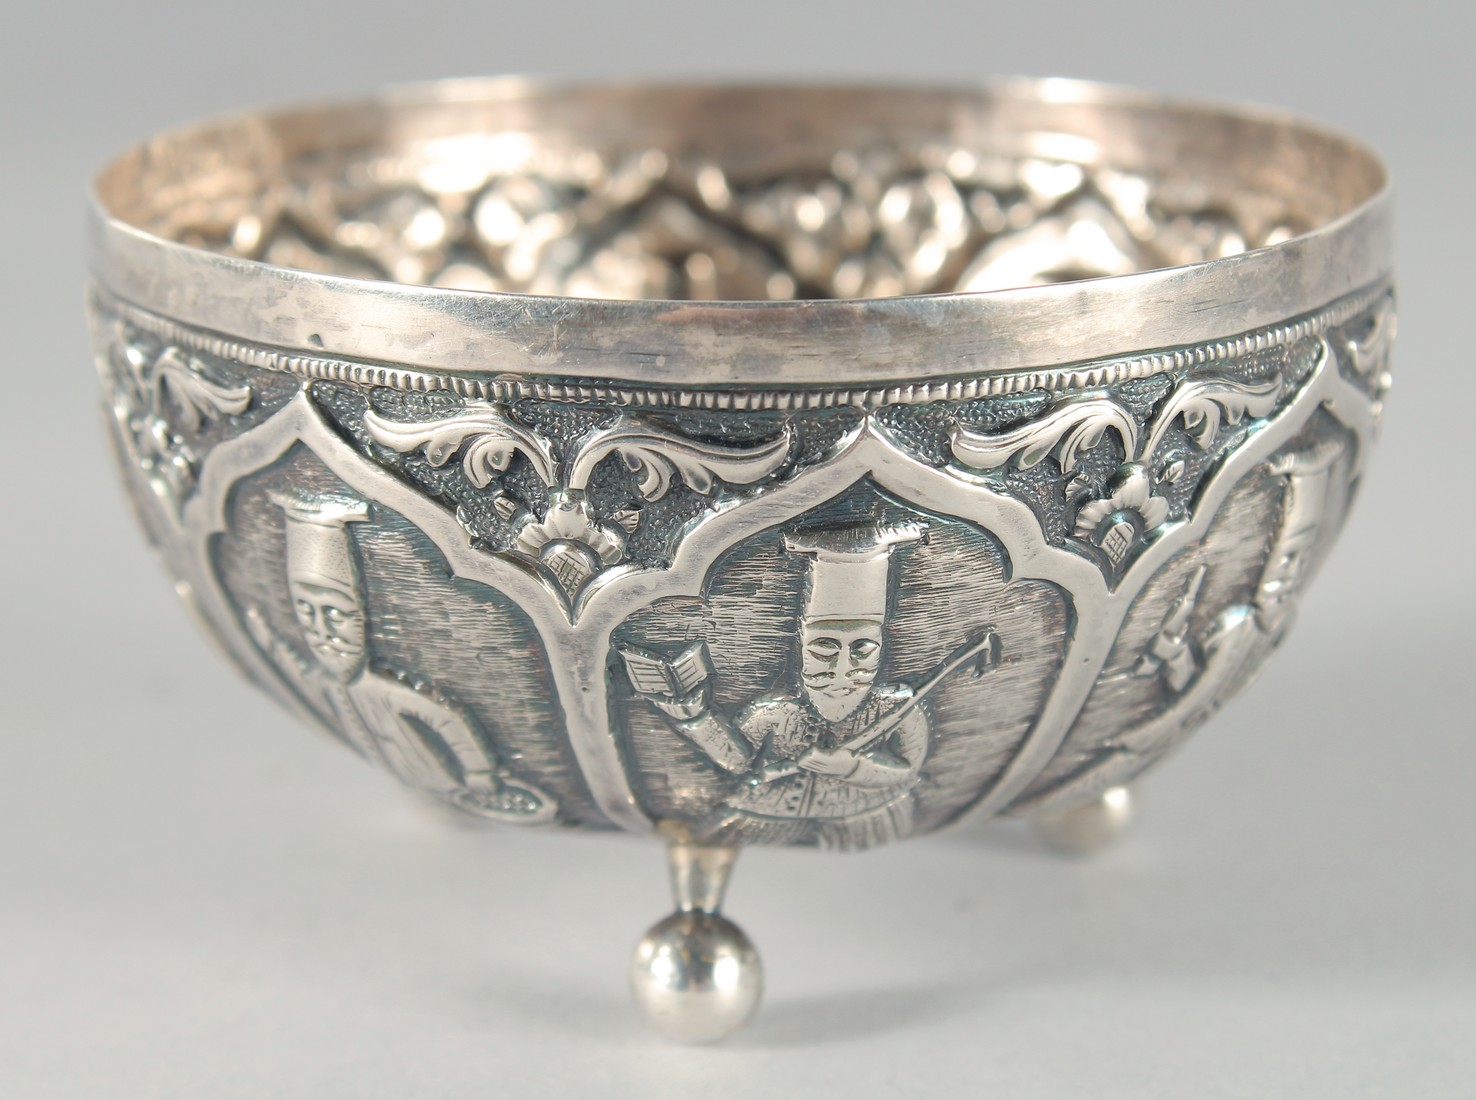 AN UNUSUAL 19TH CENTURY OTTOMAN GREEK OR ARMINIAN SILVER BOWL, with embossed and chased decoration